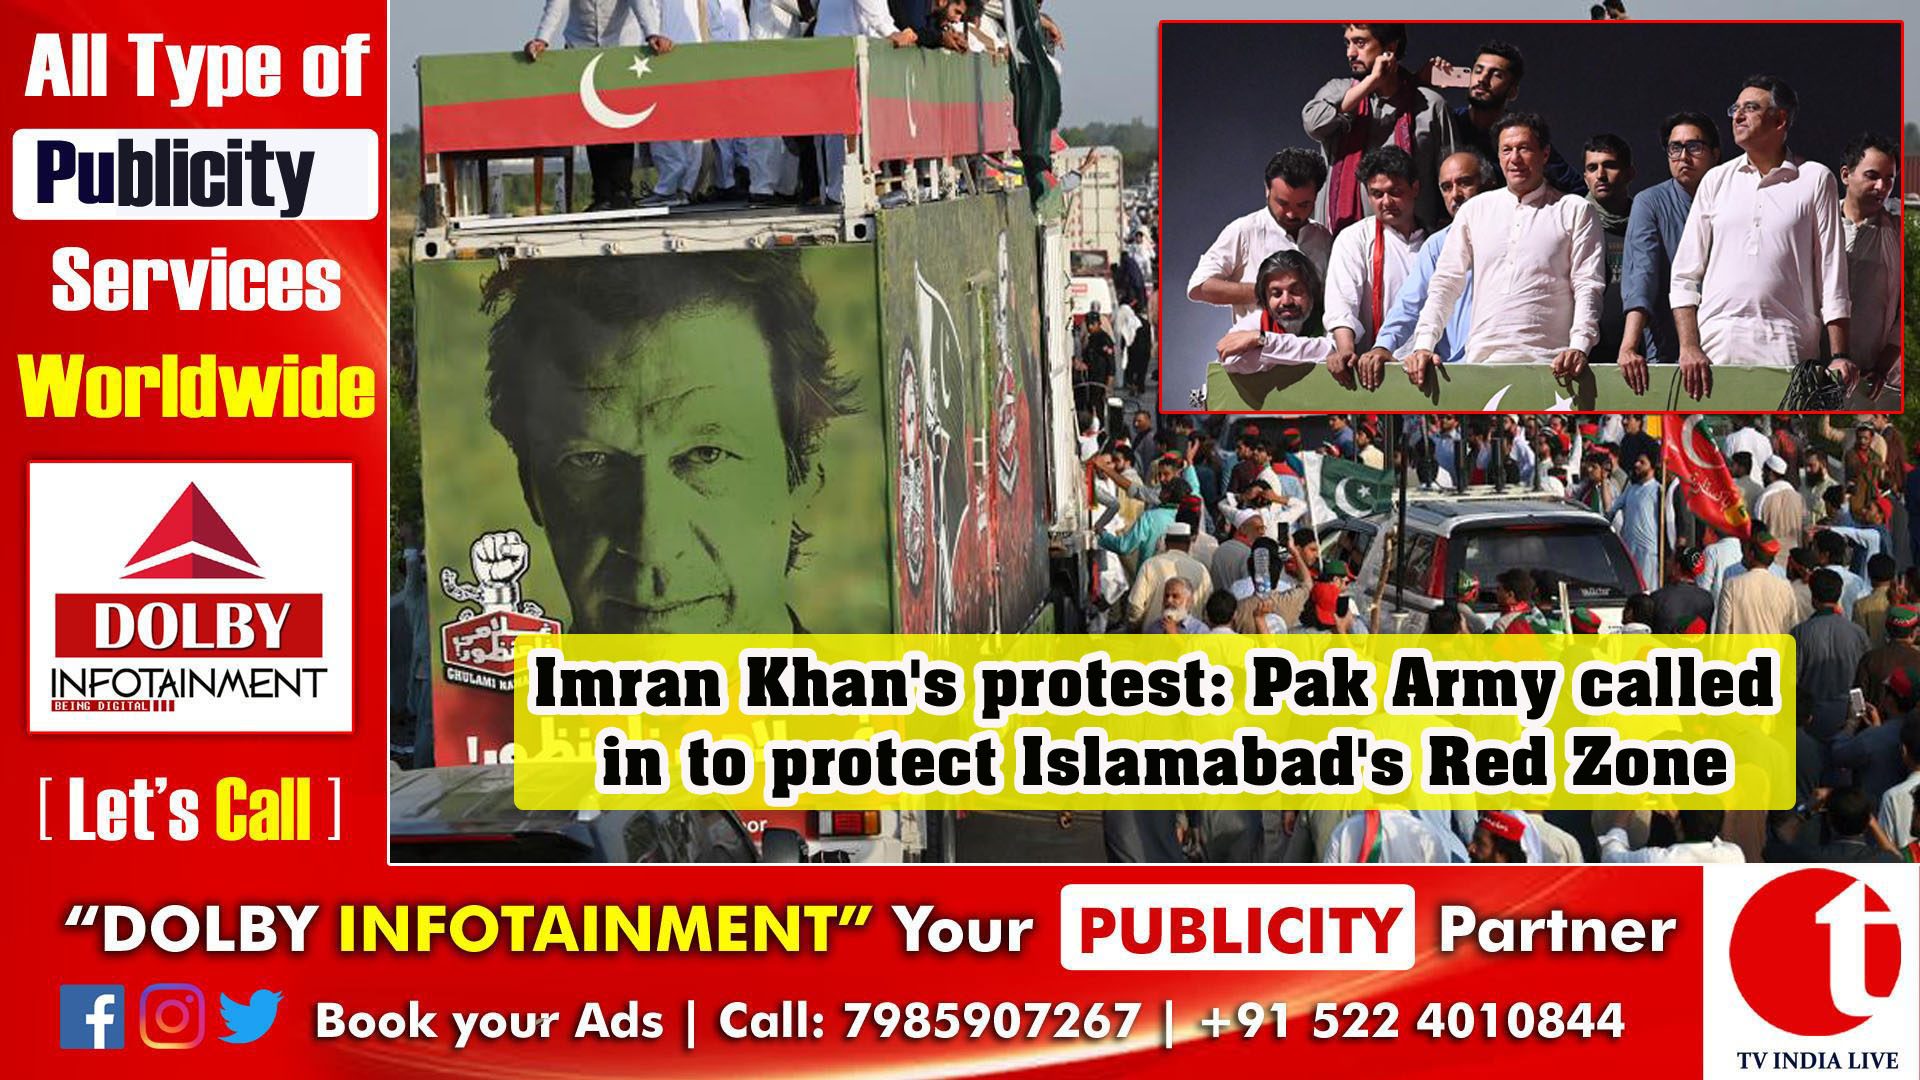 Imran Khan's protest: Pak Army called in to protect Islamabad's Red Zone